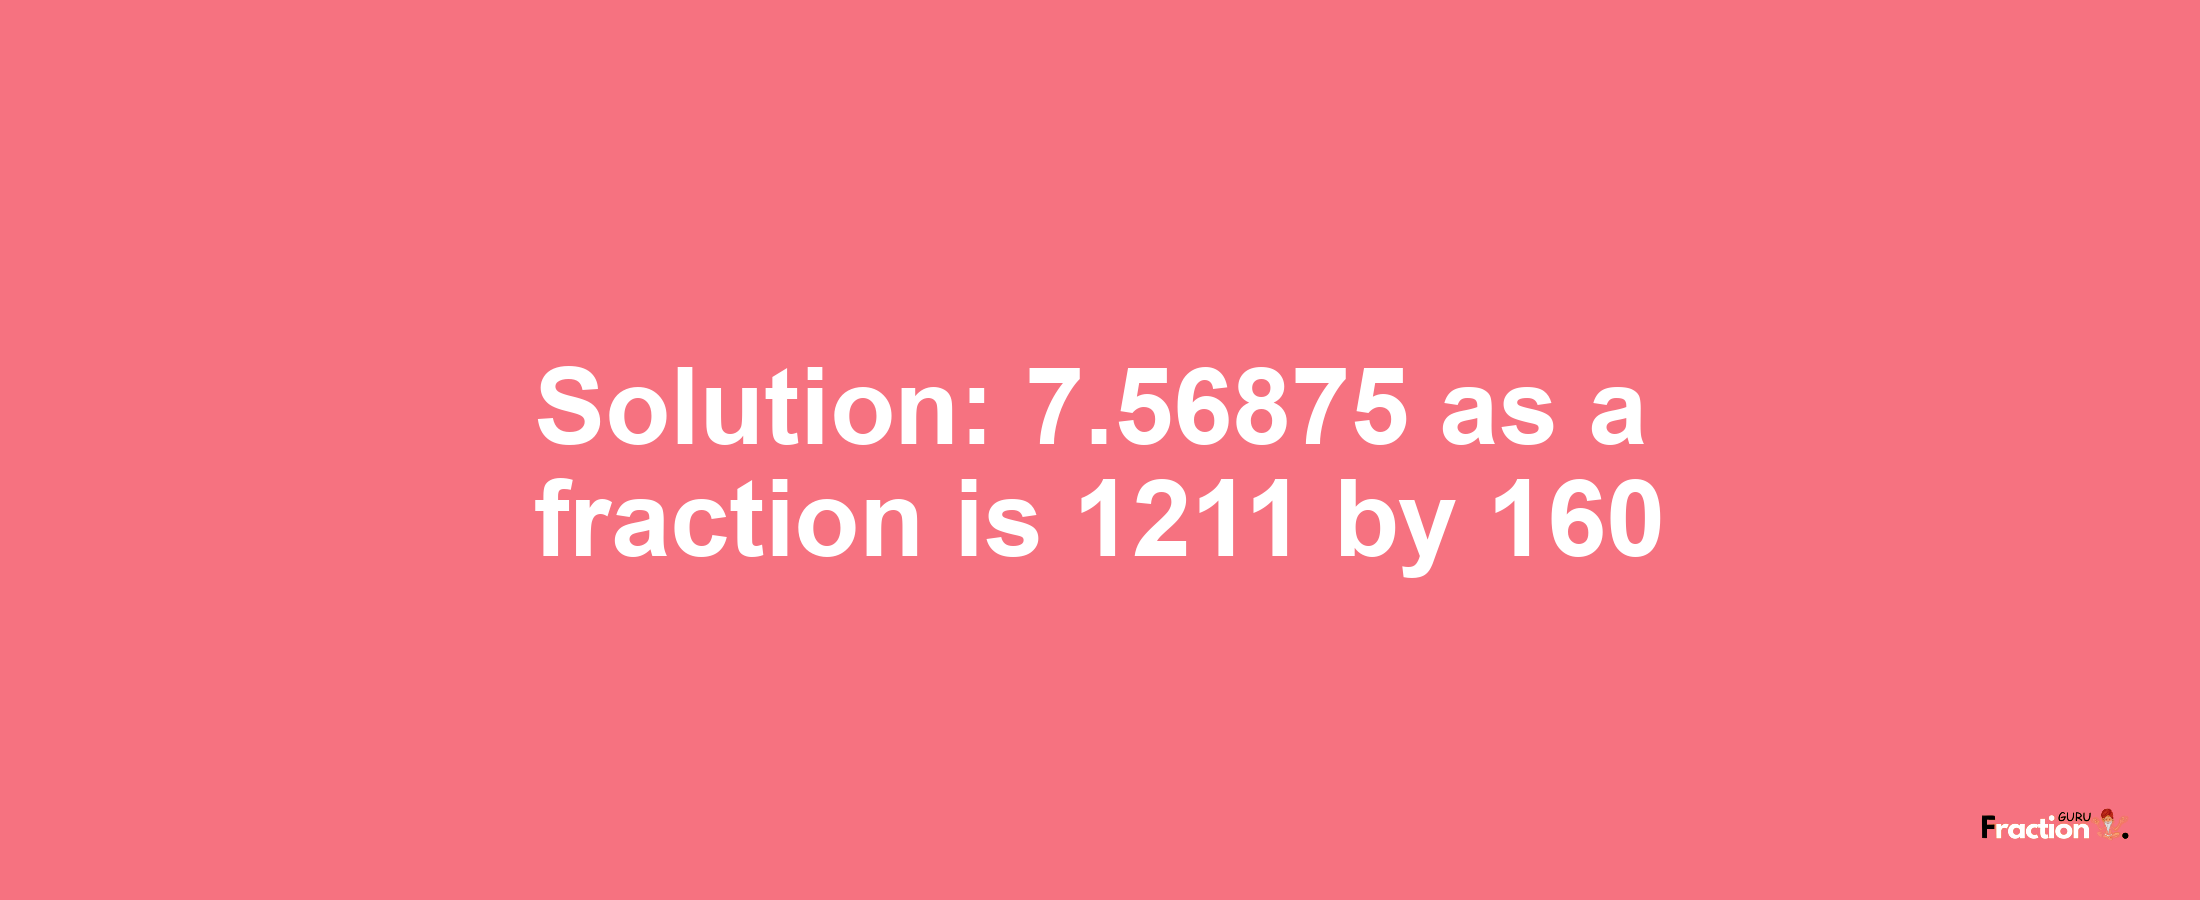 Solution:7.56875 as a fraction is 1211/160